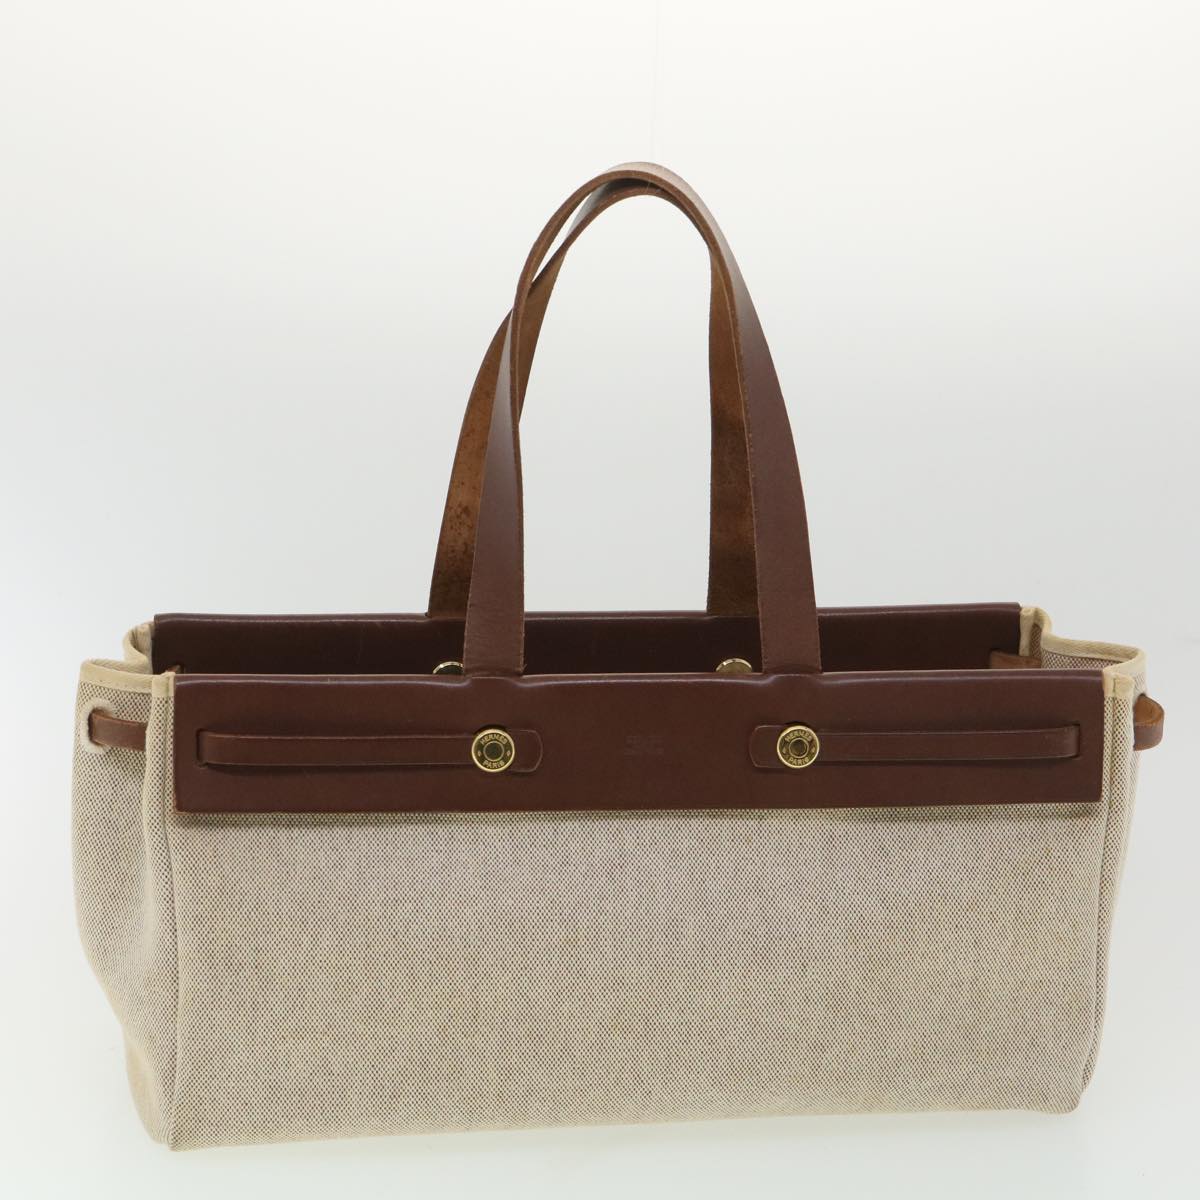 HERMES Herbag Cabass GM Tote Bag Canvas 2way Beige Brown Auth 35647